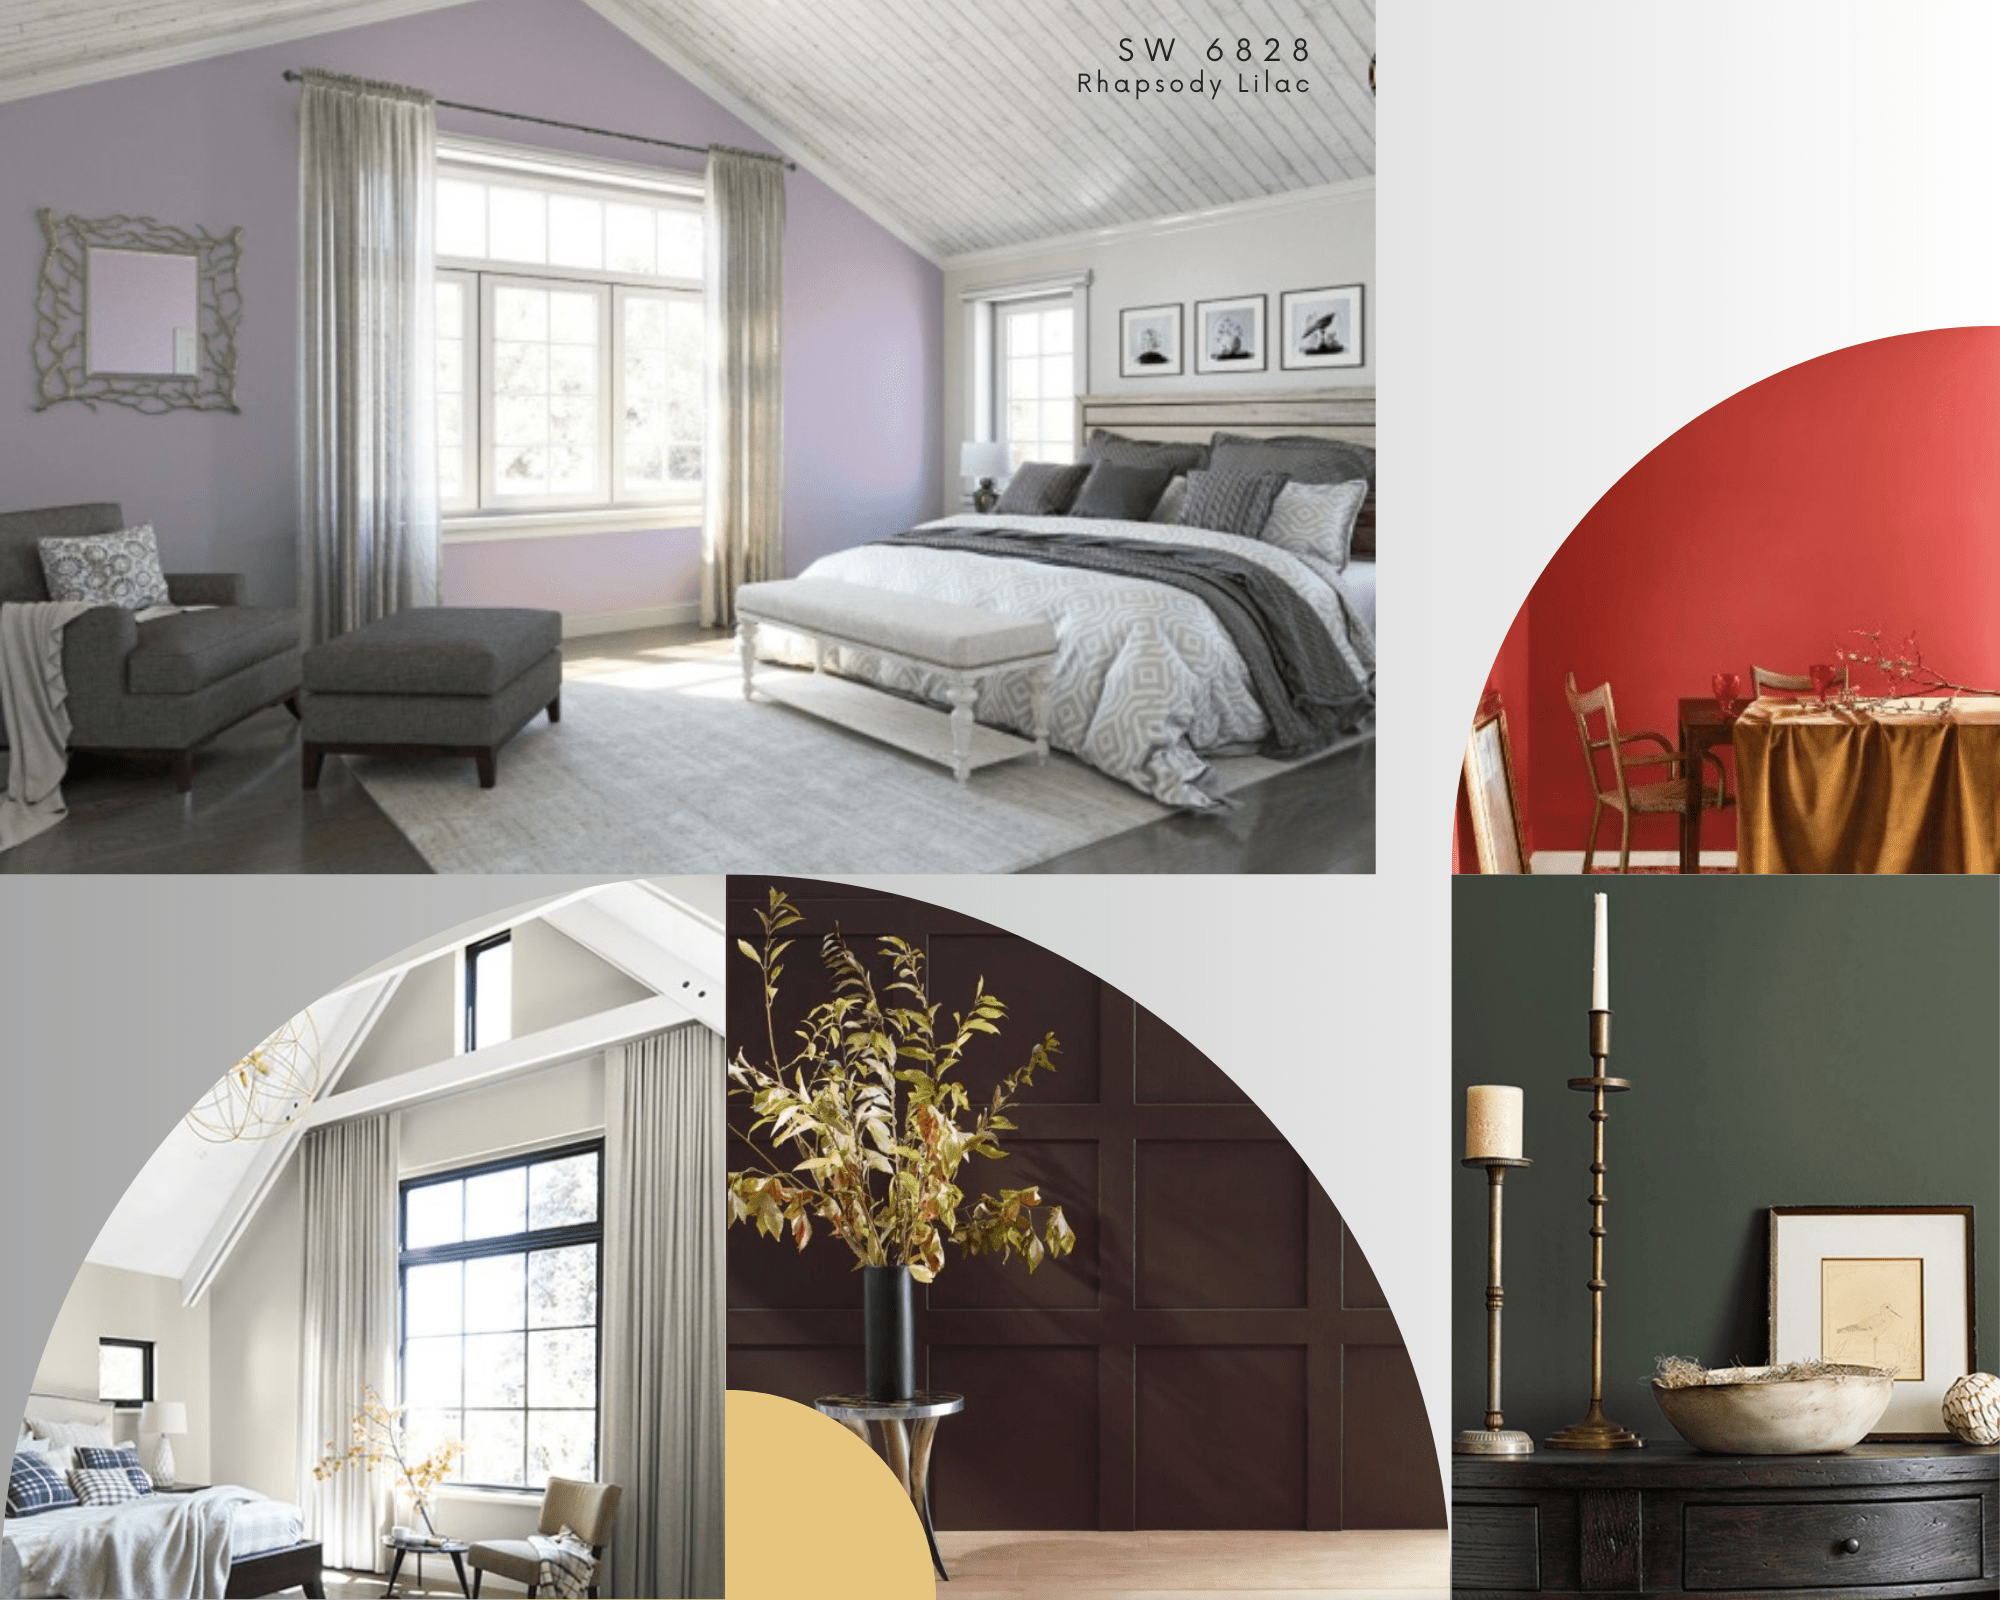 2023 Color Trends